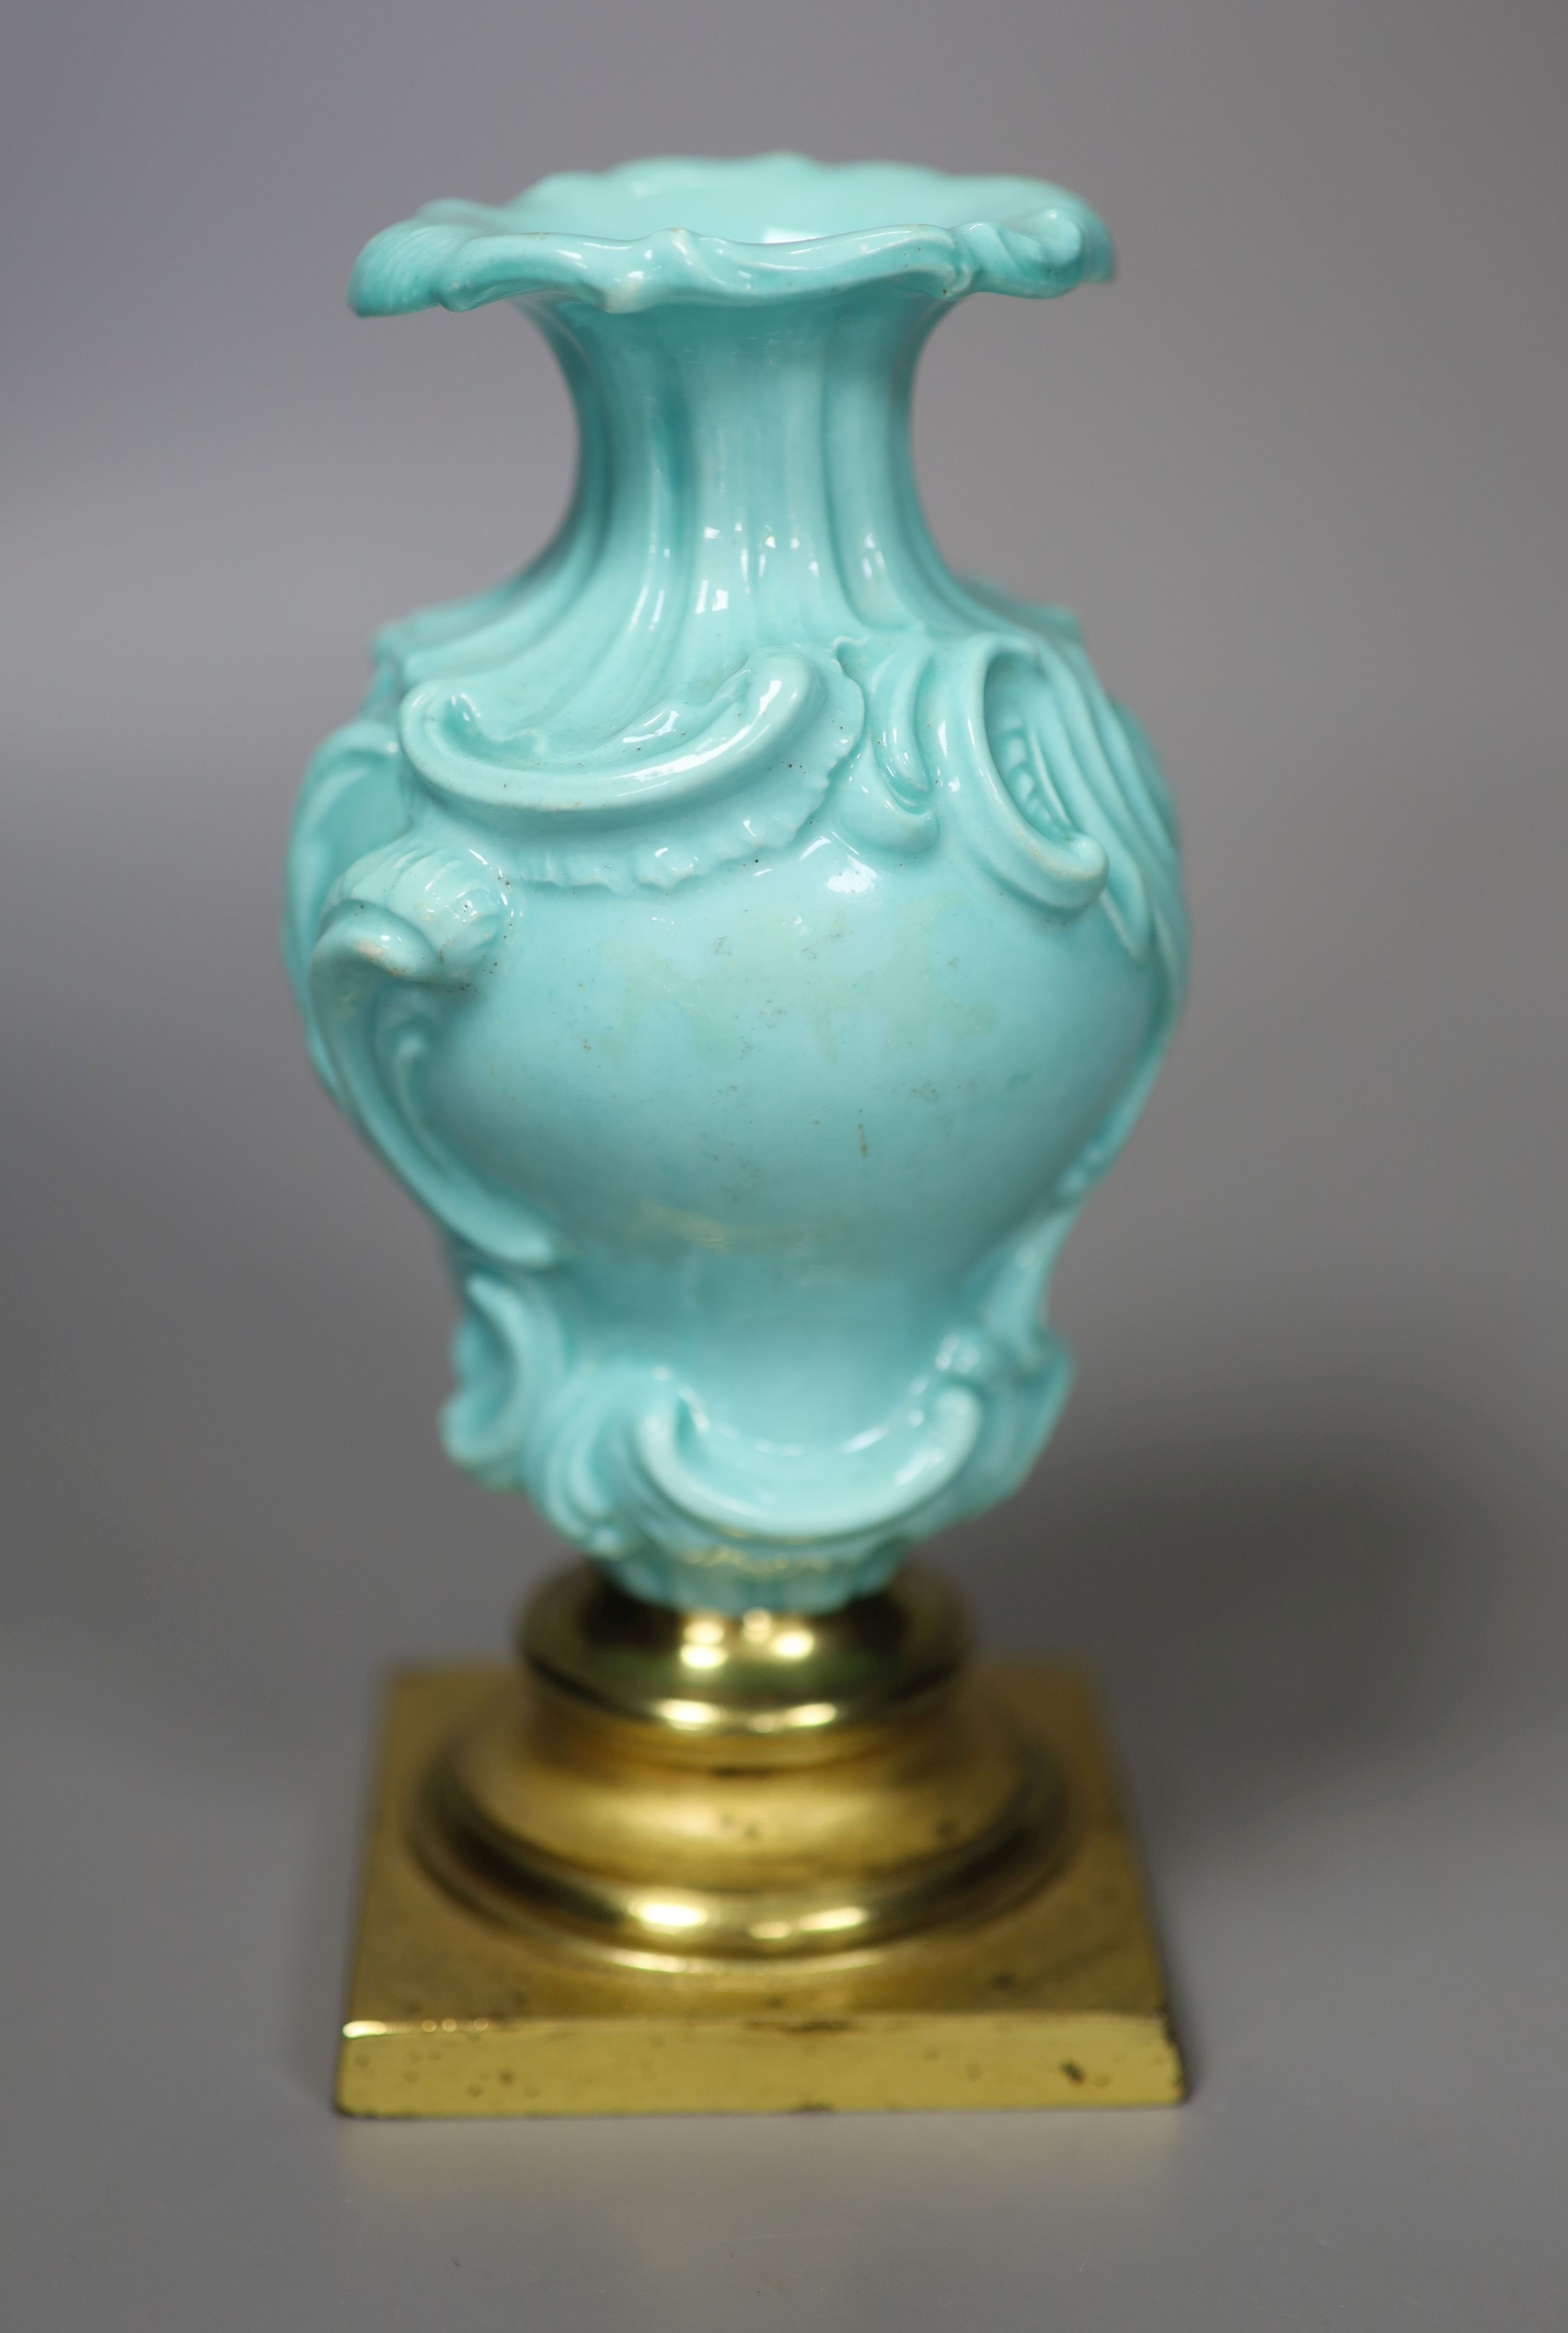 A Chelsea Derby rare rococo moulded vase with celadon type ground, mount on a gilt metal base, from the collection of Dr. Alasdair Morr